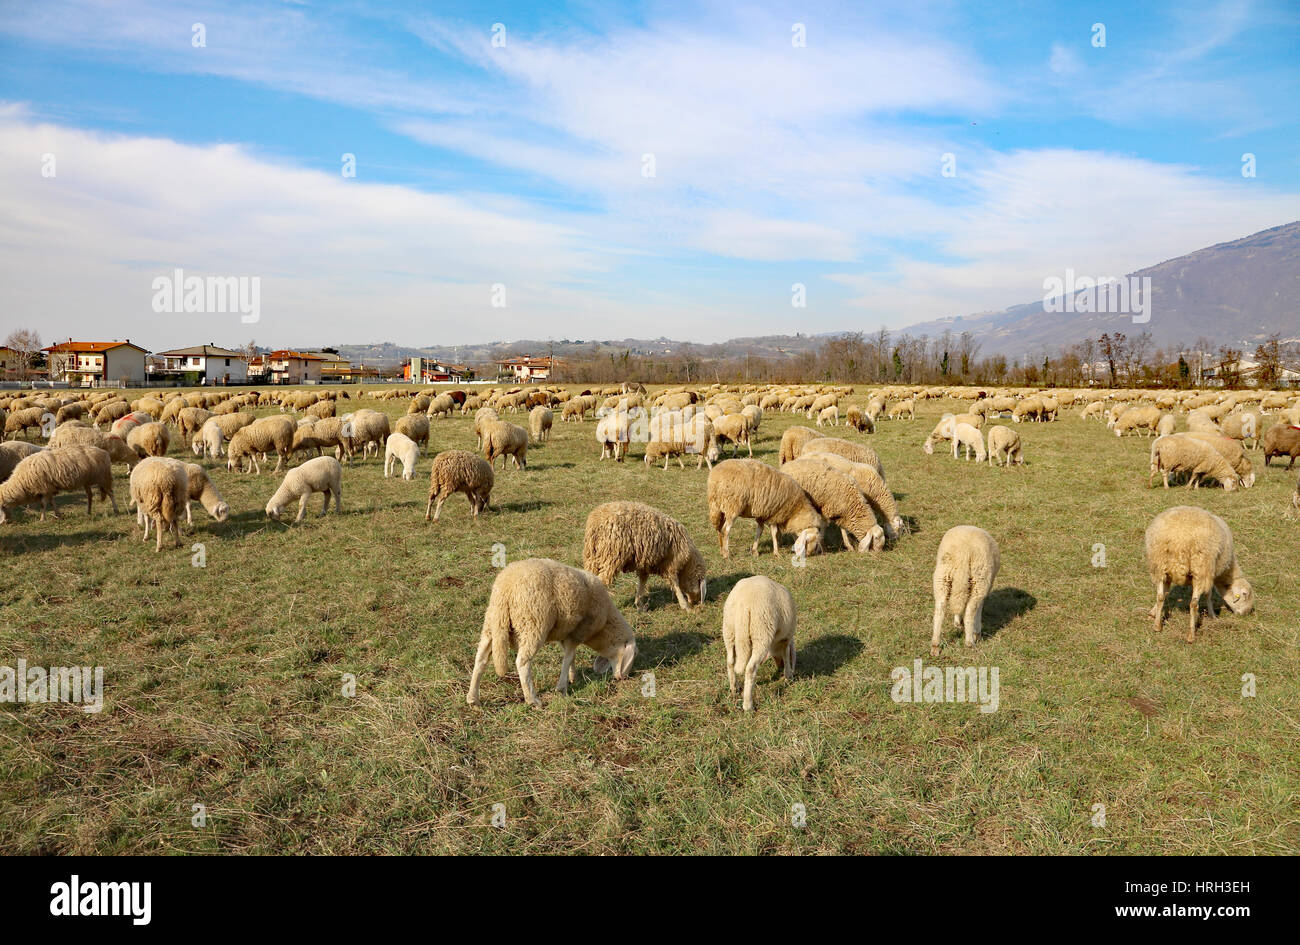 large flock of sheep grazing in the large meadow on a sunny day Stock Photo